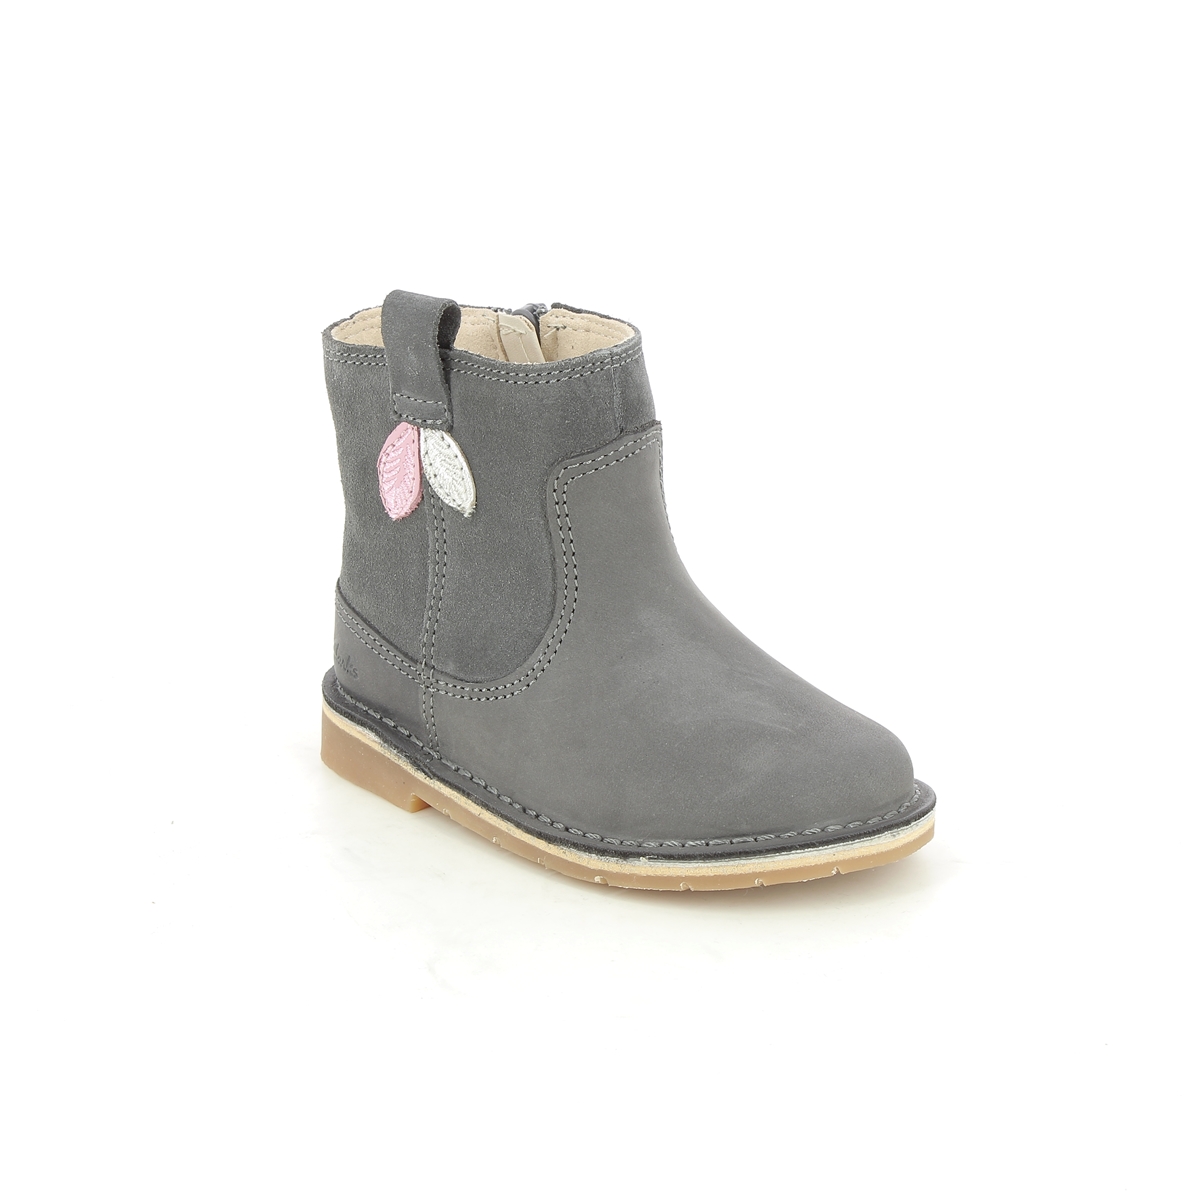 Clarks Comet Style T Grey Leather Kids Toddler Girls Boots 619426F In Size 7.5 In Plain Grey Leather F Width Fitting Regular Fit For kids